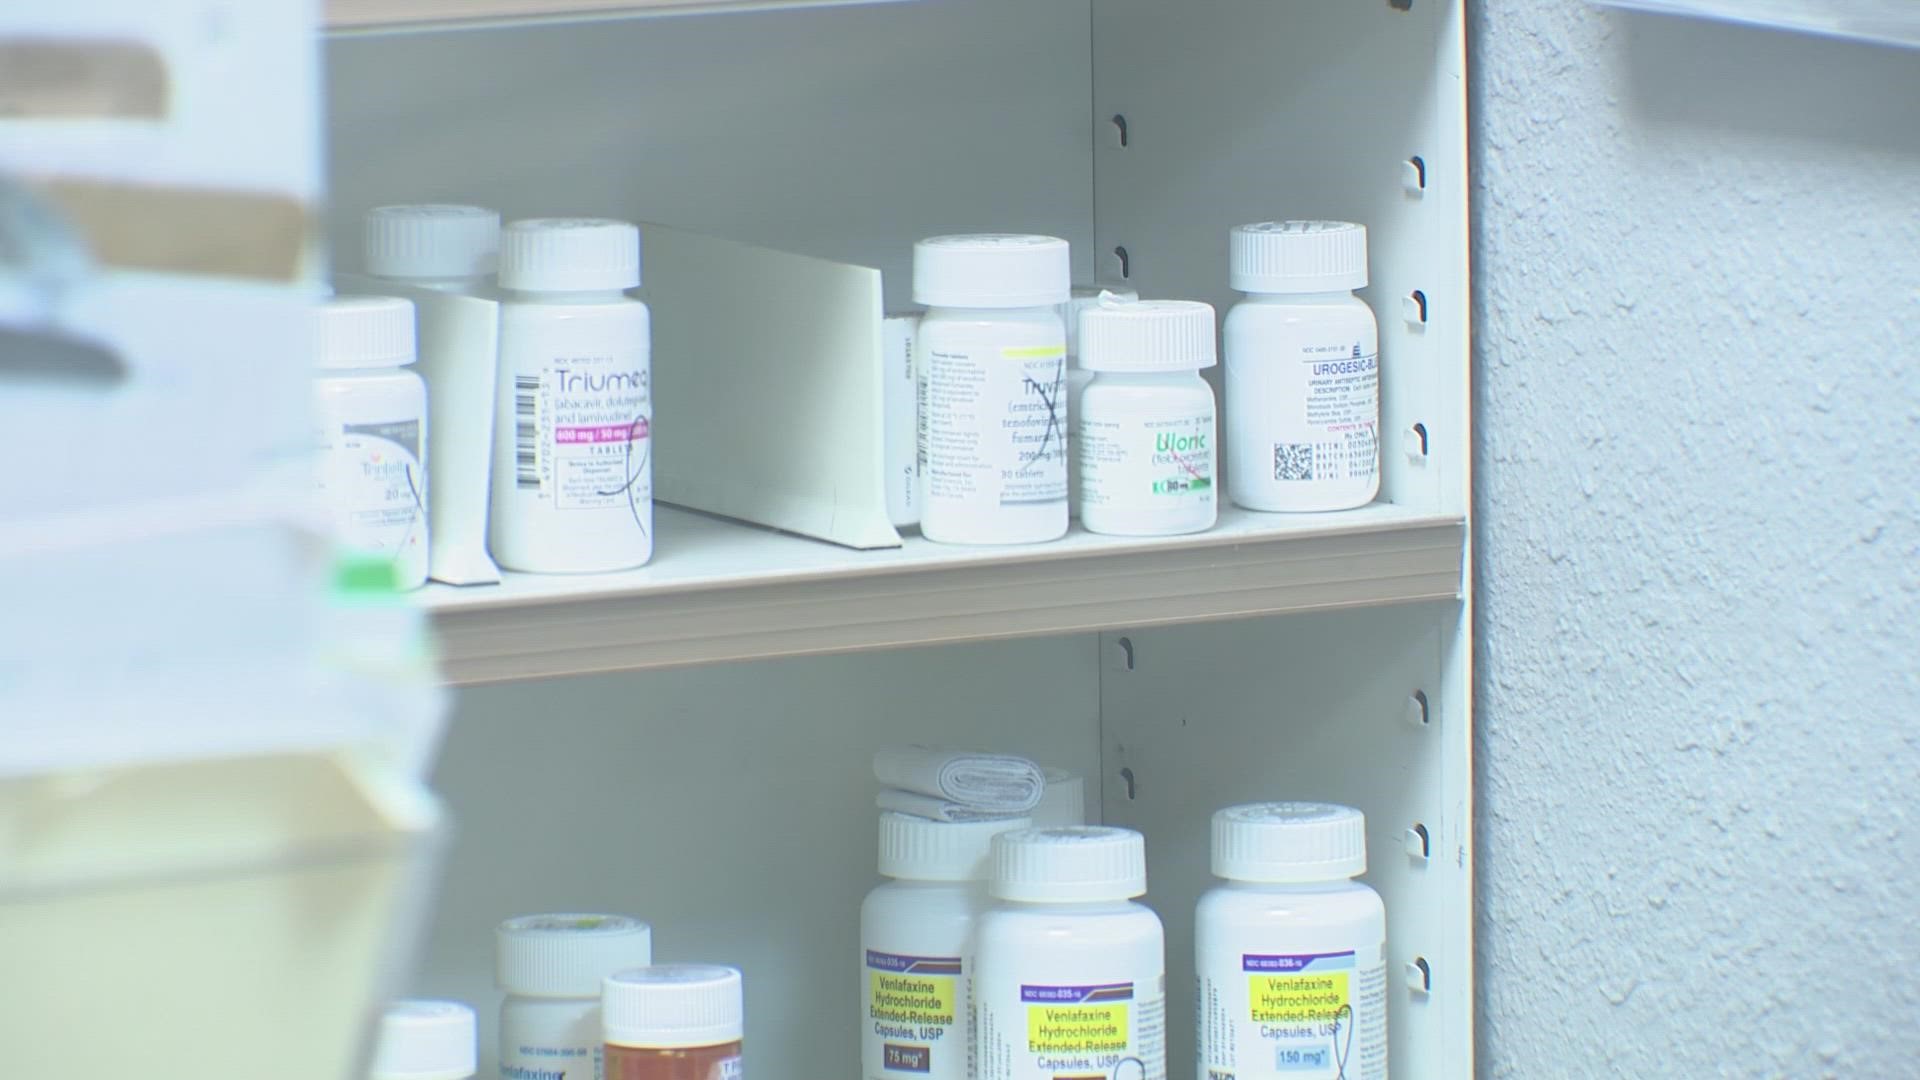 Respiratory illnesses are on the rise in Central Texas, and common medications to treat the flu are low in stock.